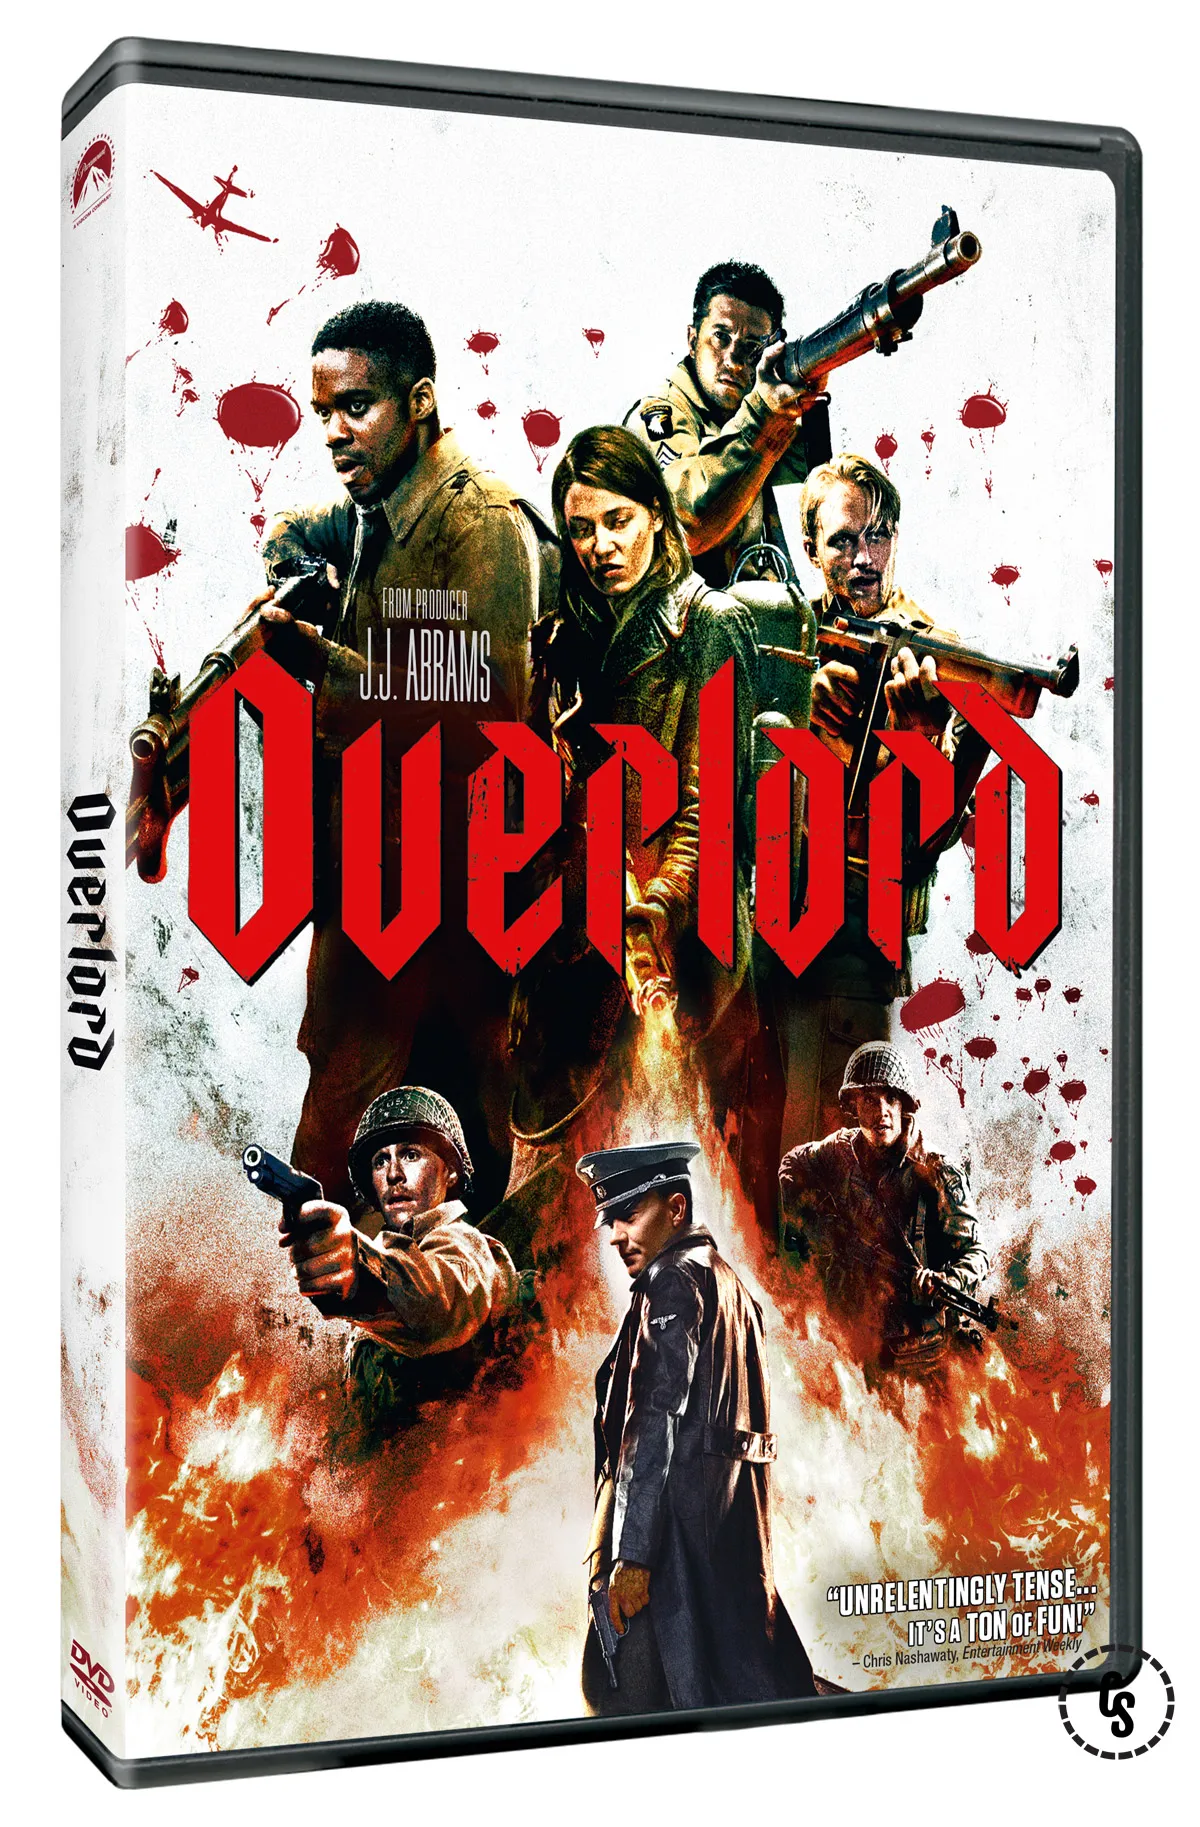 Overlord DVD Cover